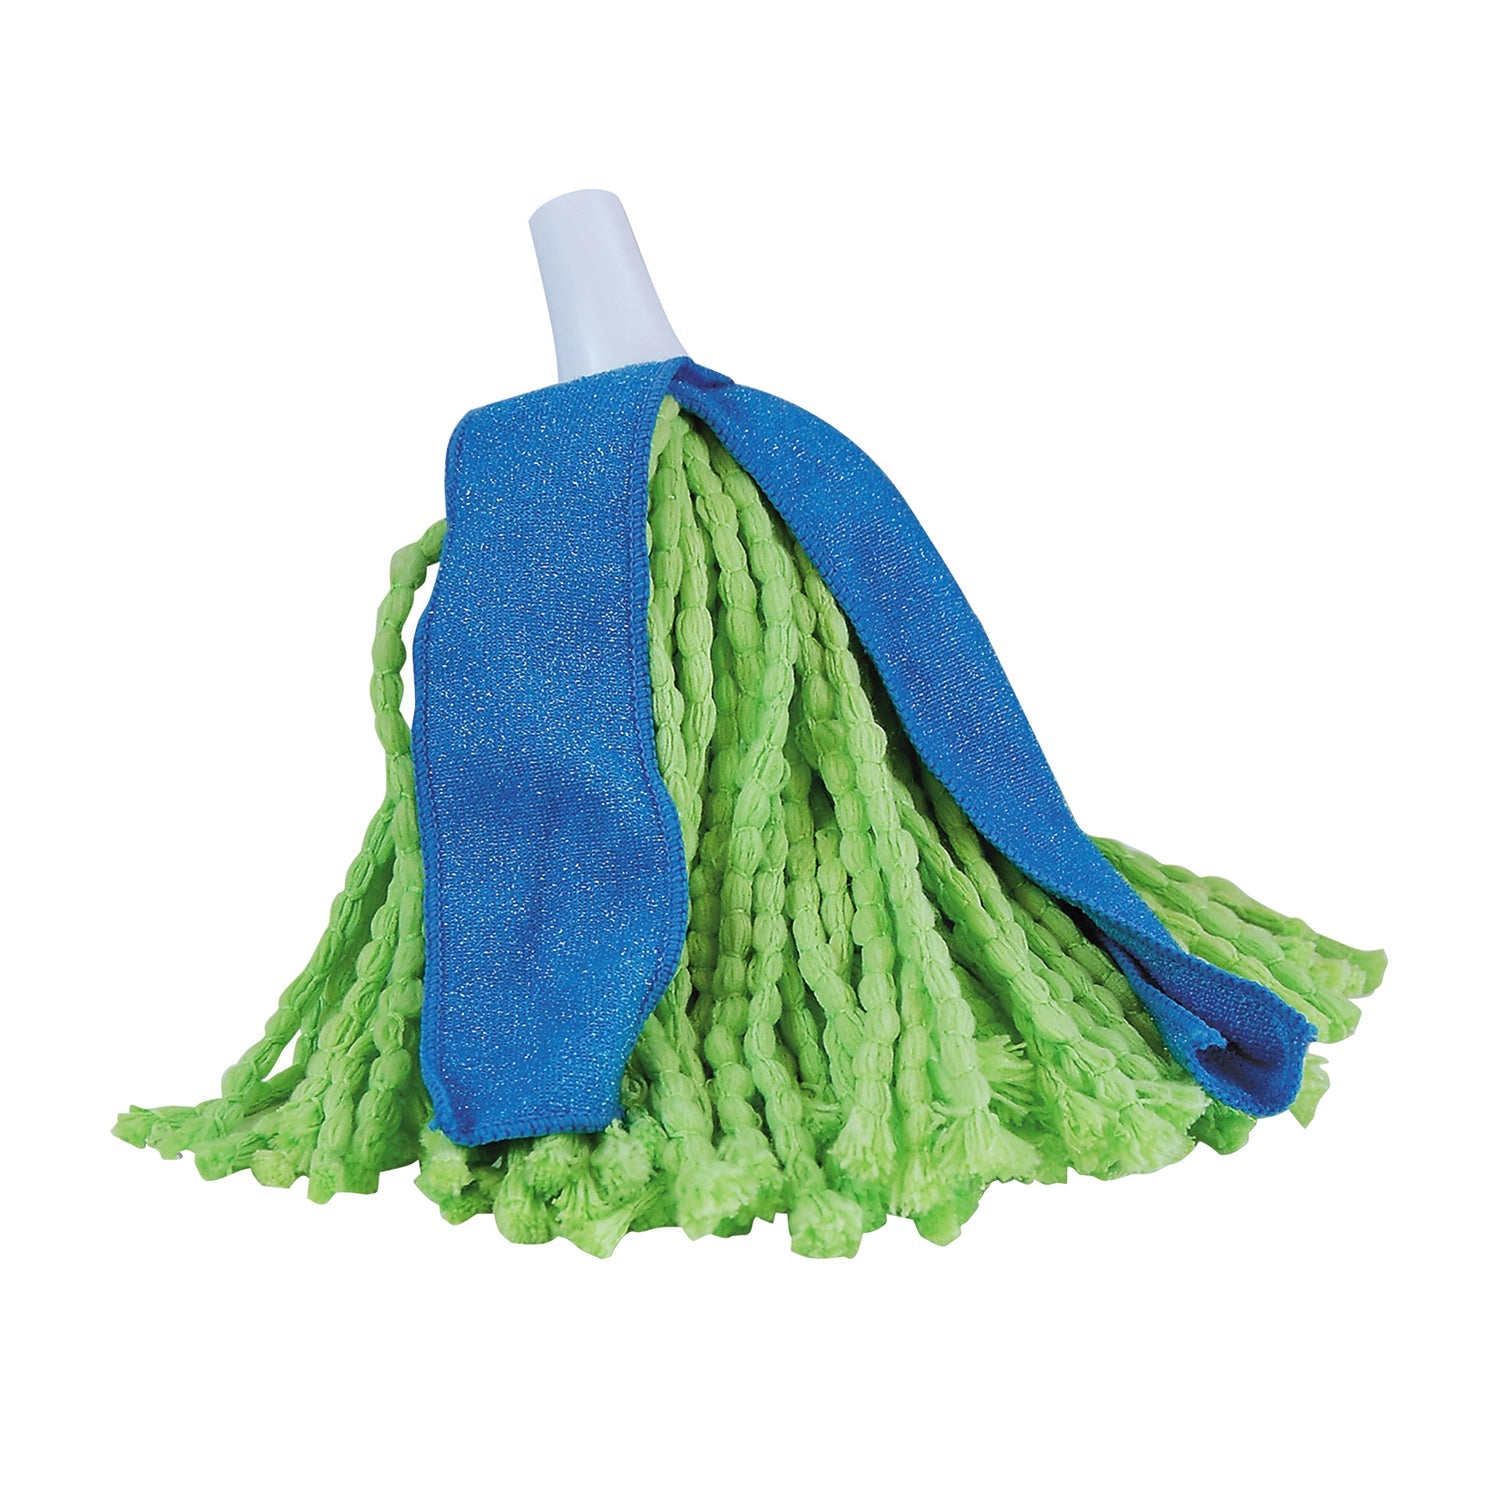 4739 Microfiber Cone Mop and Cone Broom Used for Cleaning Dusty and Wet Floor Surfaces and Tiles. (Without Pole) - China, 0.615 kgs